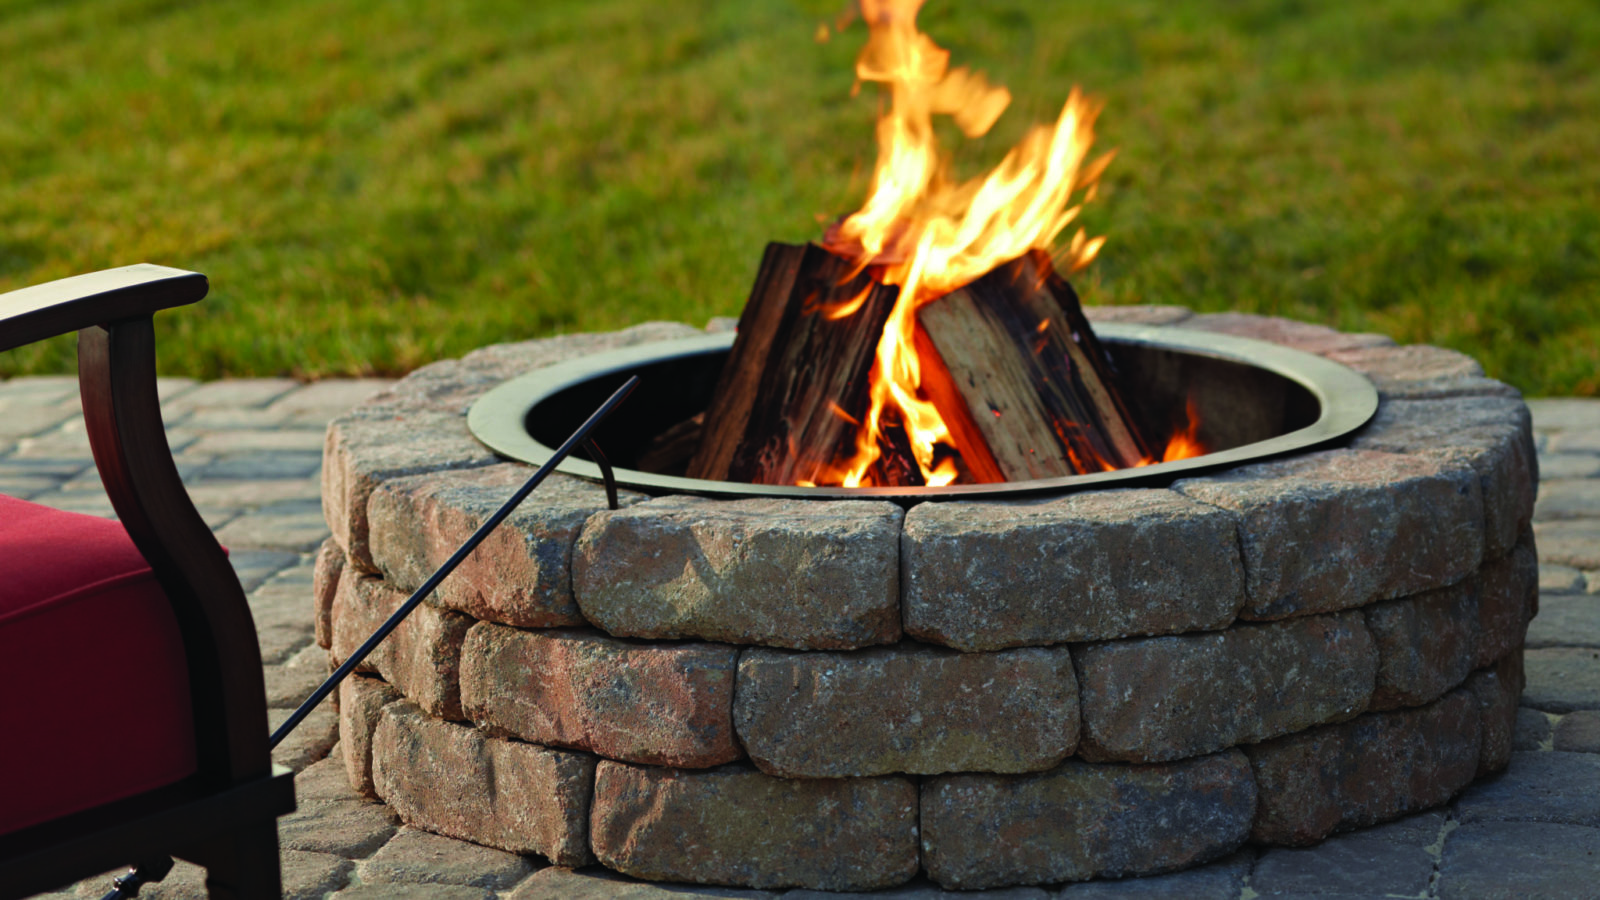 Gas Vs Wood Fire Pit Pros And Cons, How Much Does A Gas Fire Pit Cost